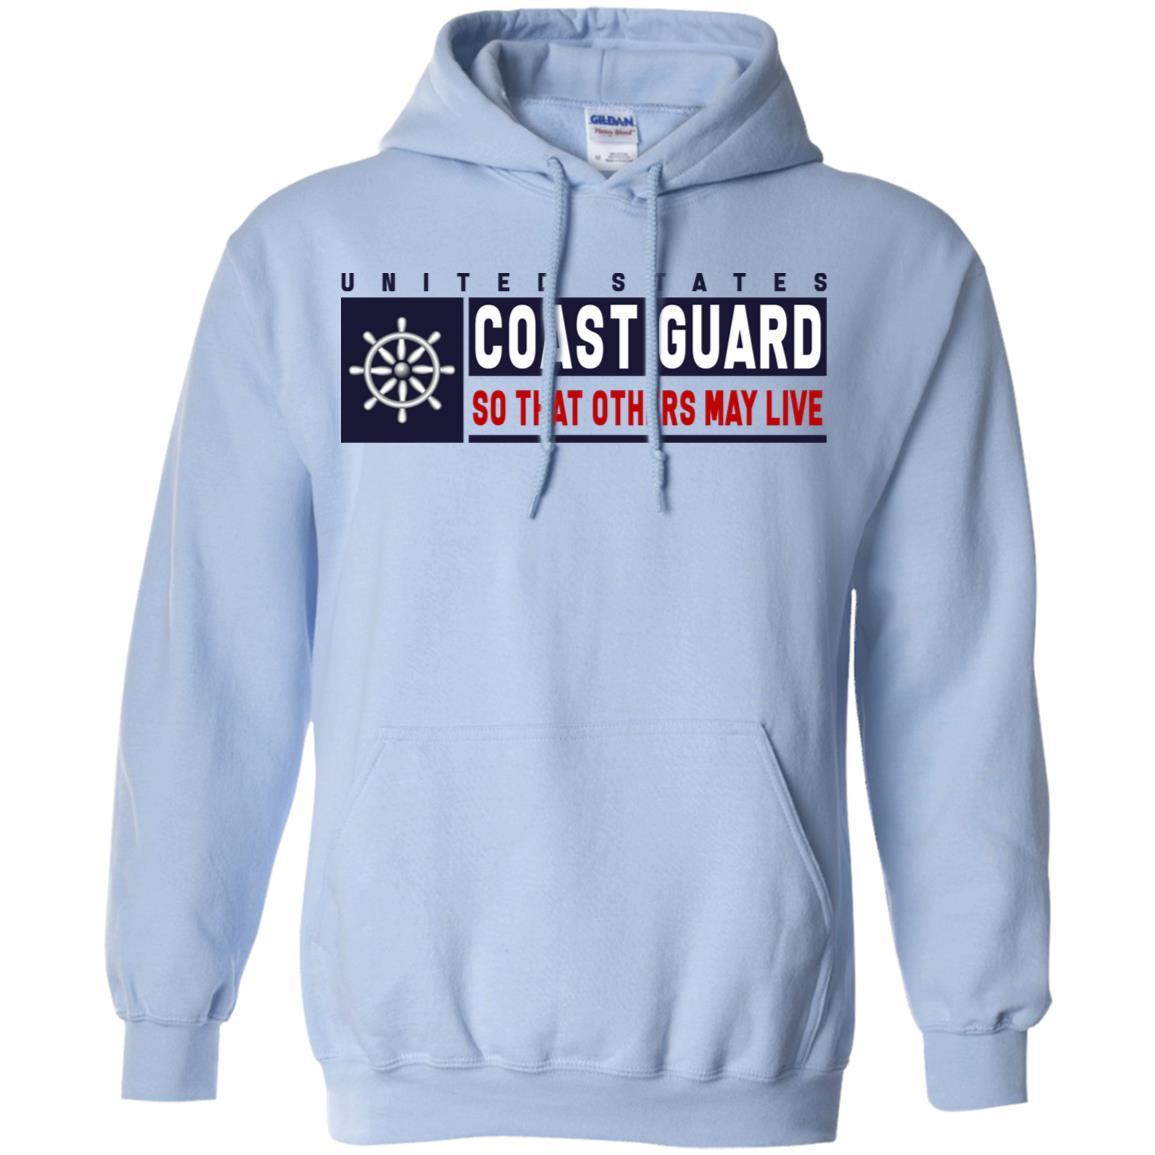 US Coast Guard Quartermaster QM Logo- So that others may live Long Sleeve - Pullover Hoodie-TShirt-USCG-Veterans Nation